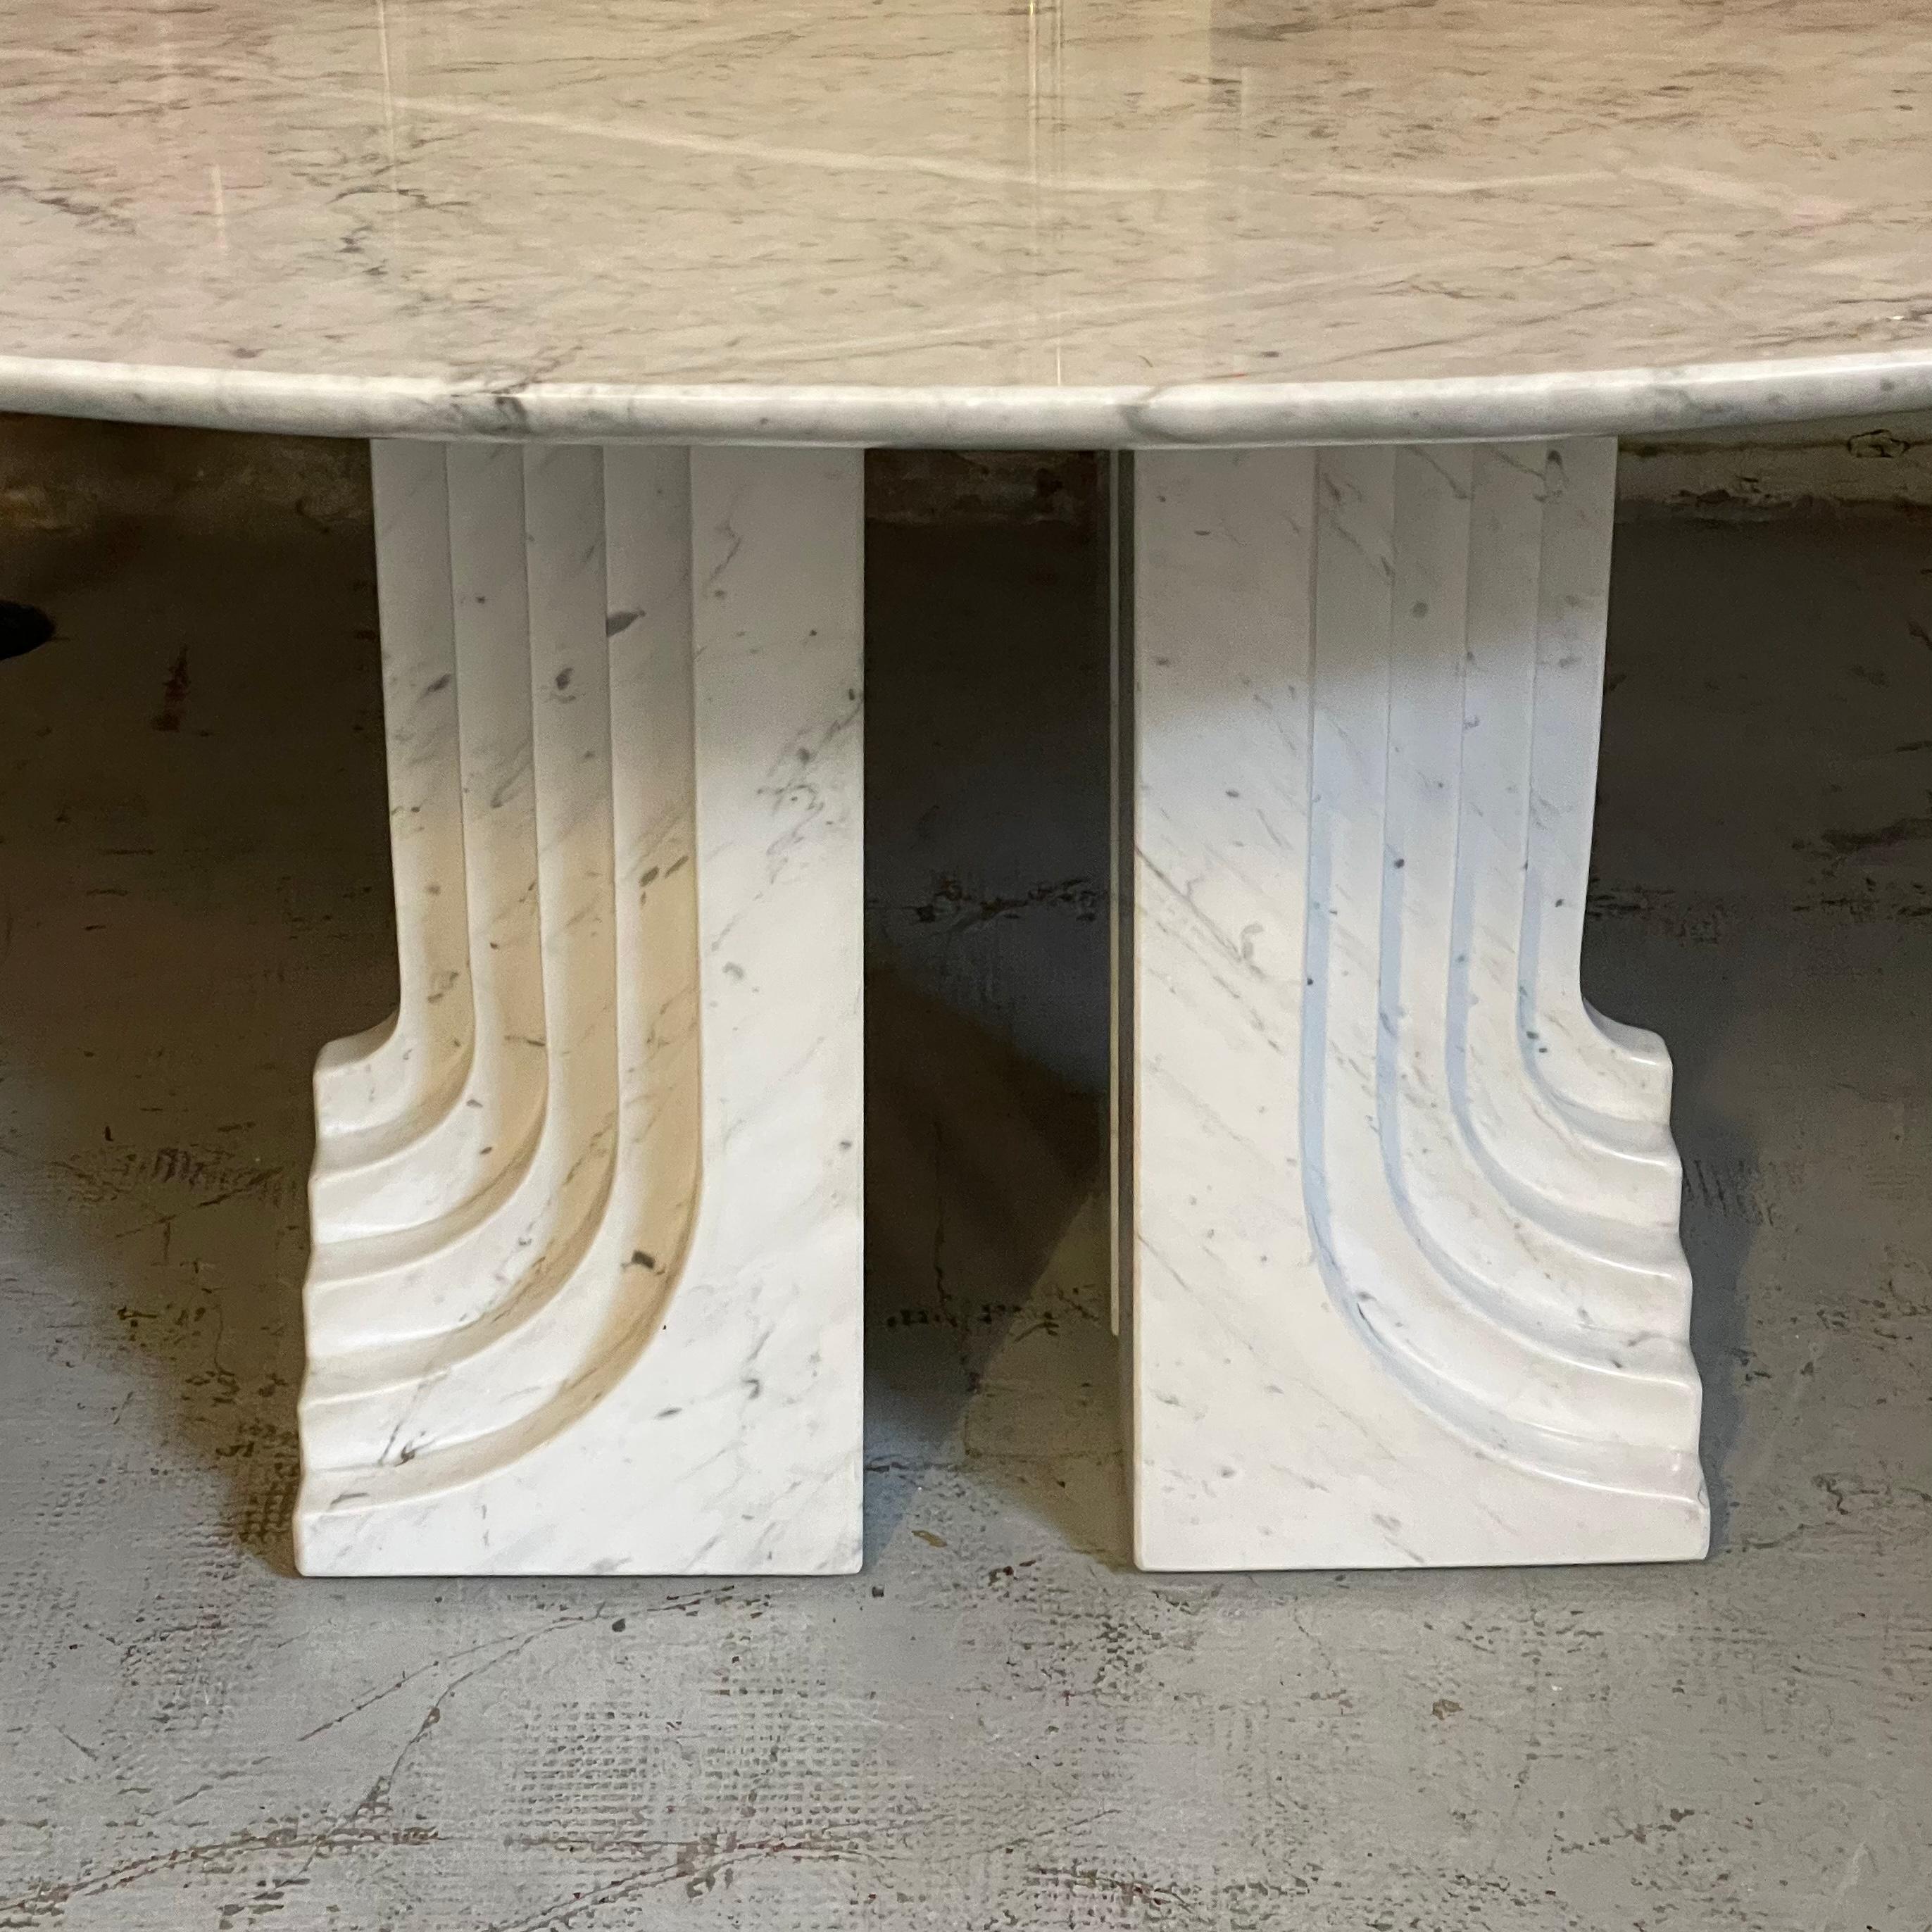 Carlo Scarpa's Samo Table is made of white marble. The legs are seated by a single block with grooves and thick oval top. If you belong to the ‘Ultrarational’ series, this item is one of a kind, an exceptional collector's item. Good condition but